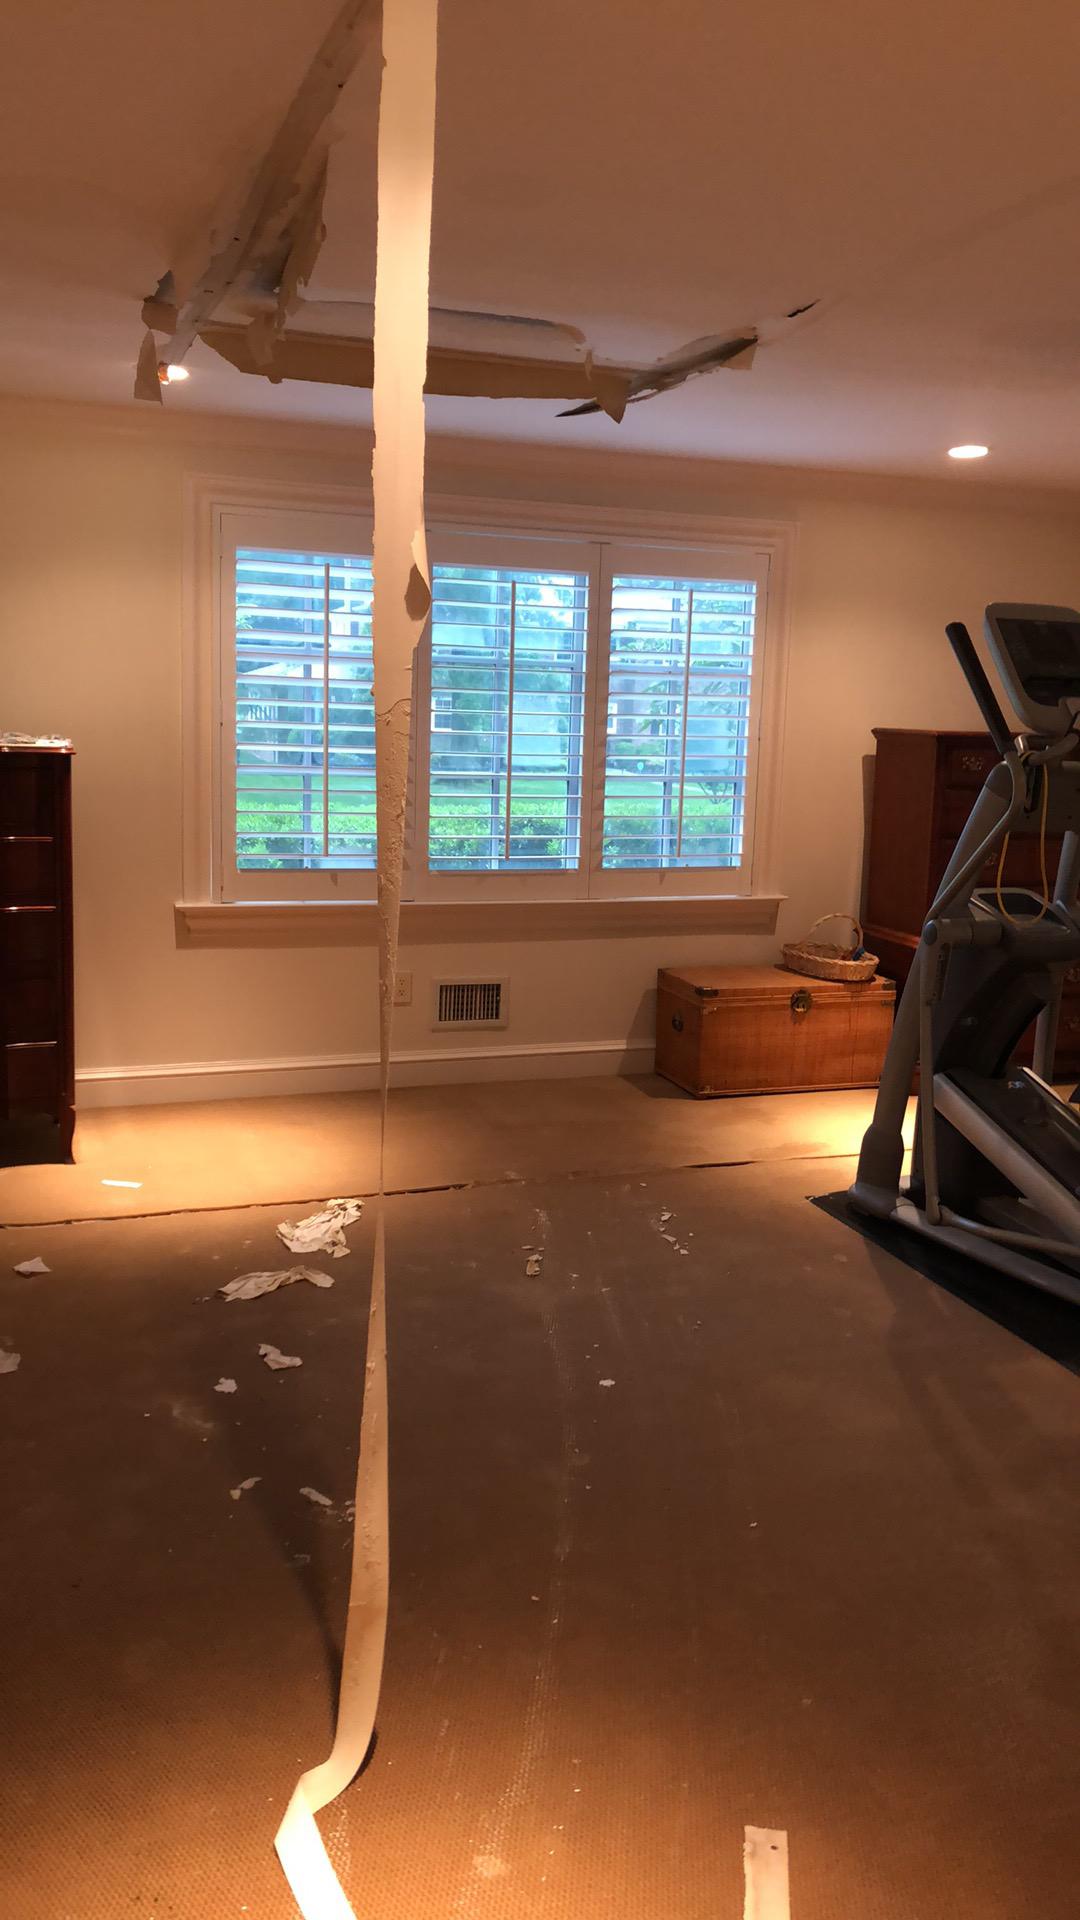 Exercise room water damaged